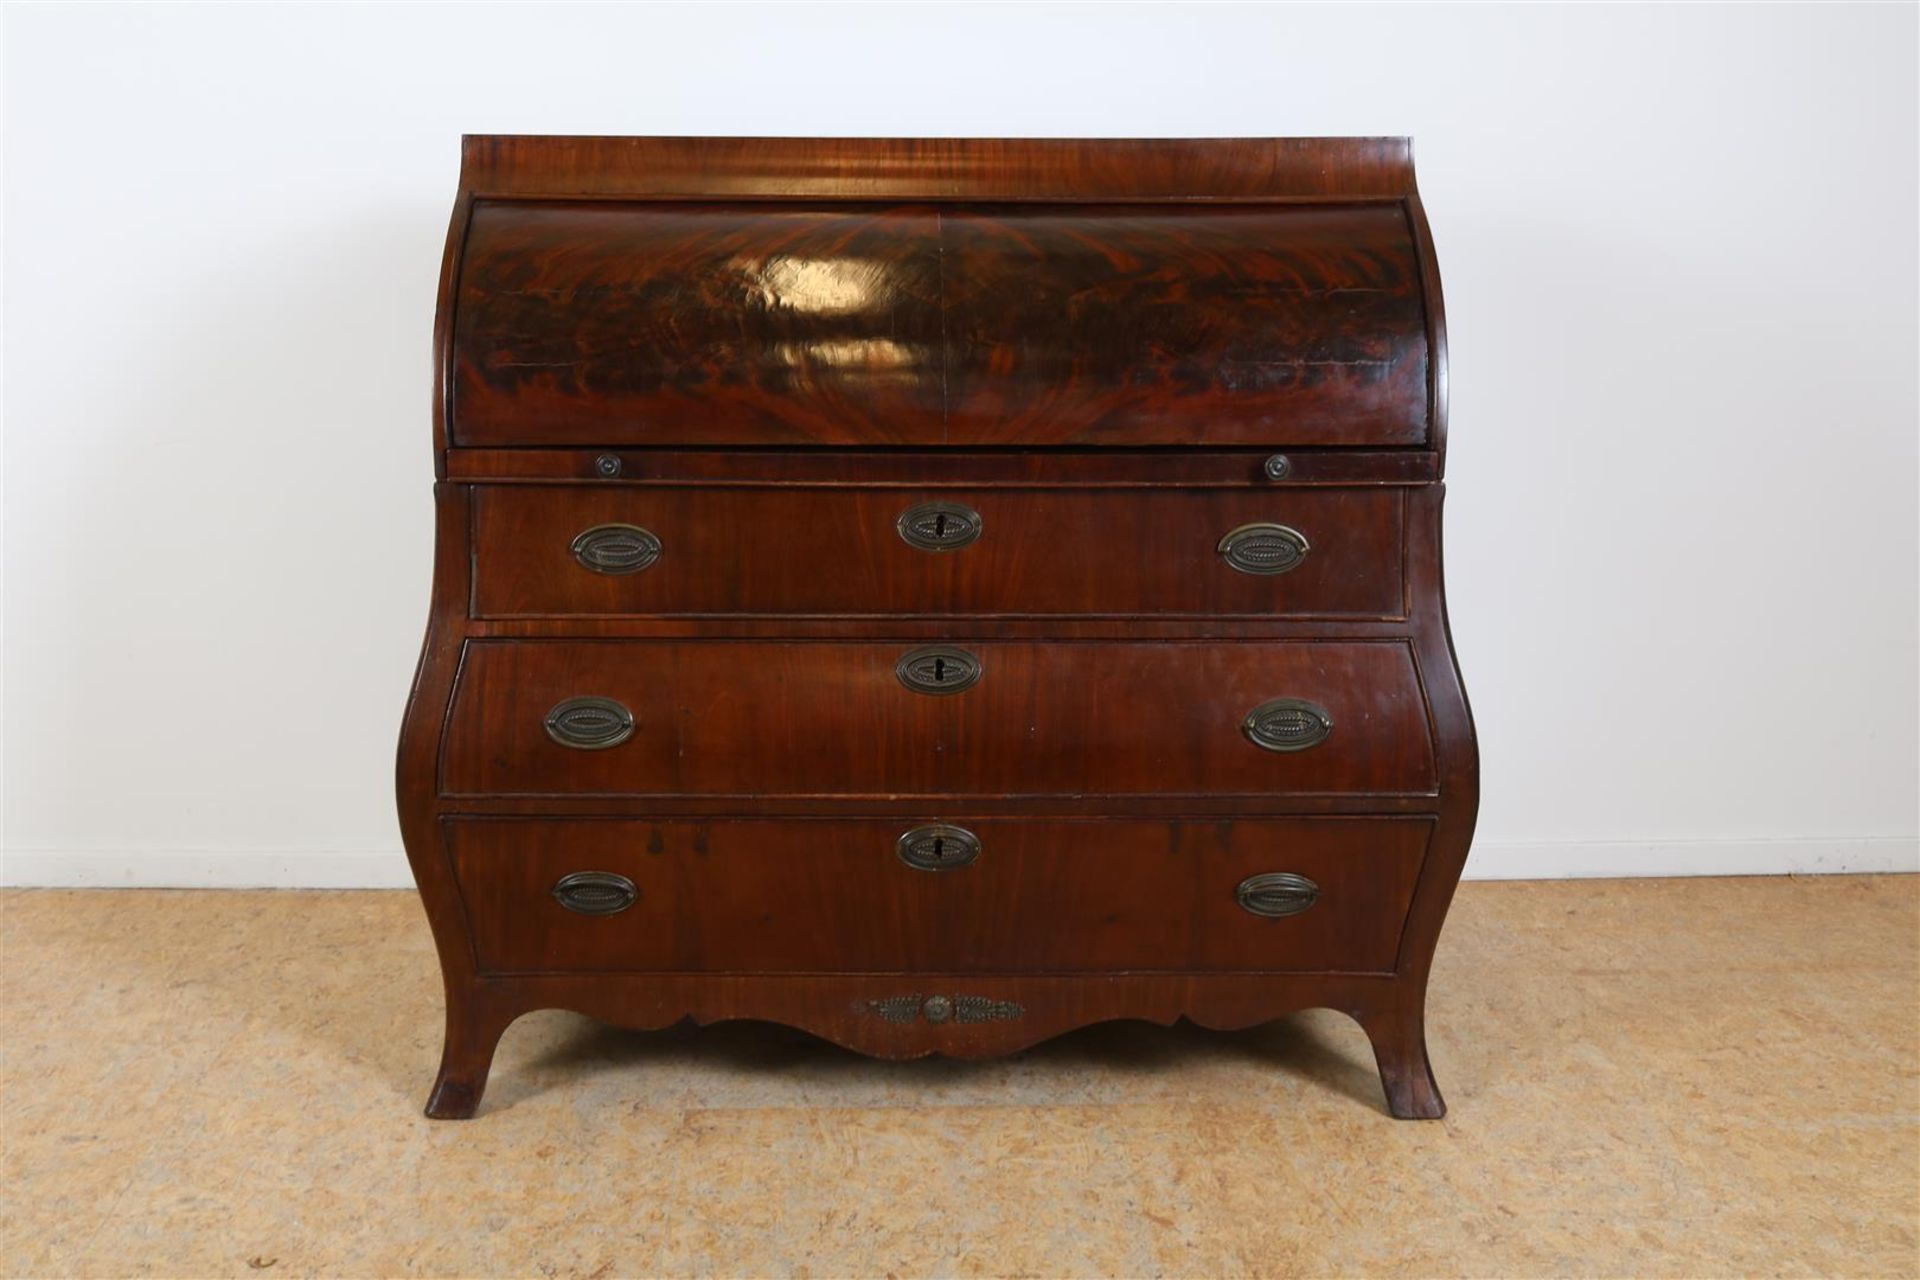 Mahogany Louis XVI roll-top desk with interior of 9 drawers, 2 hidden storage compartments behind